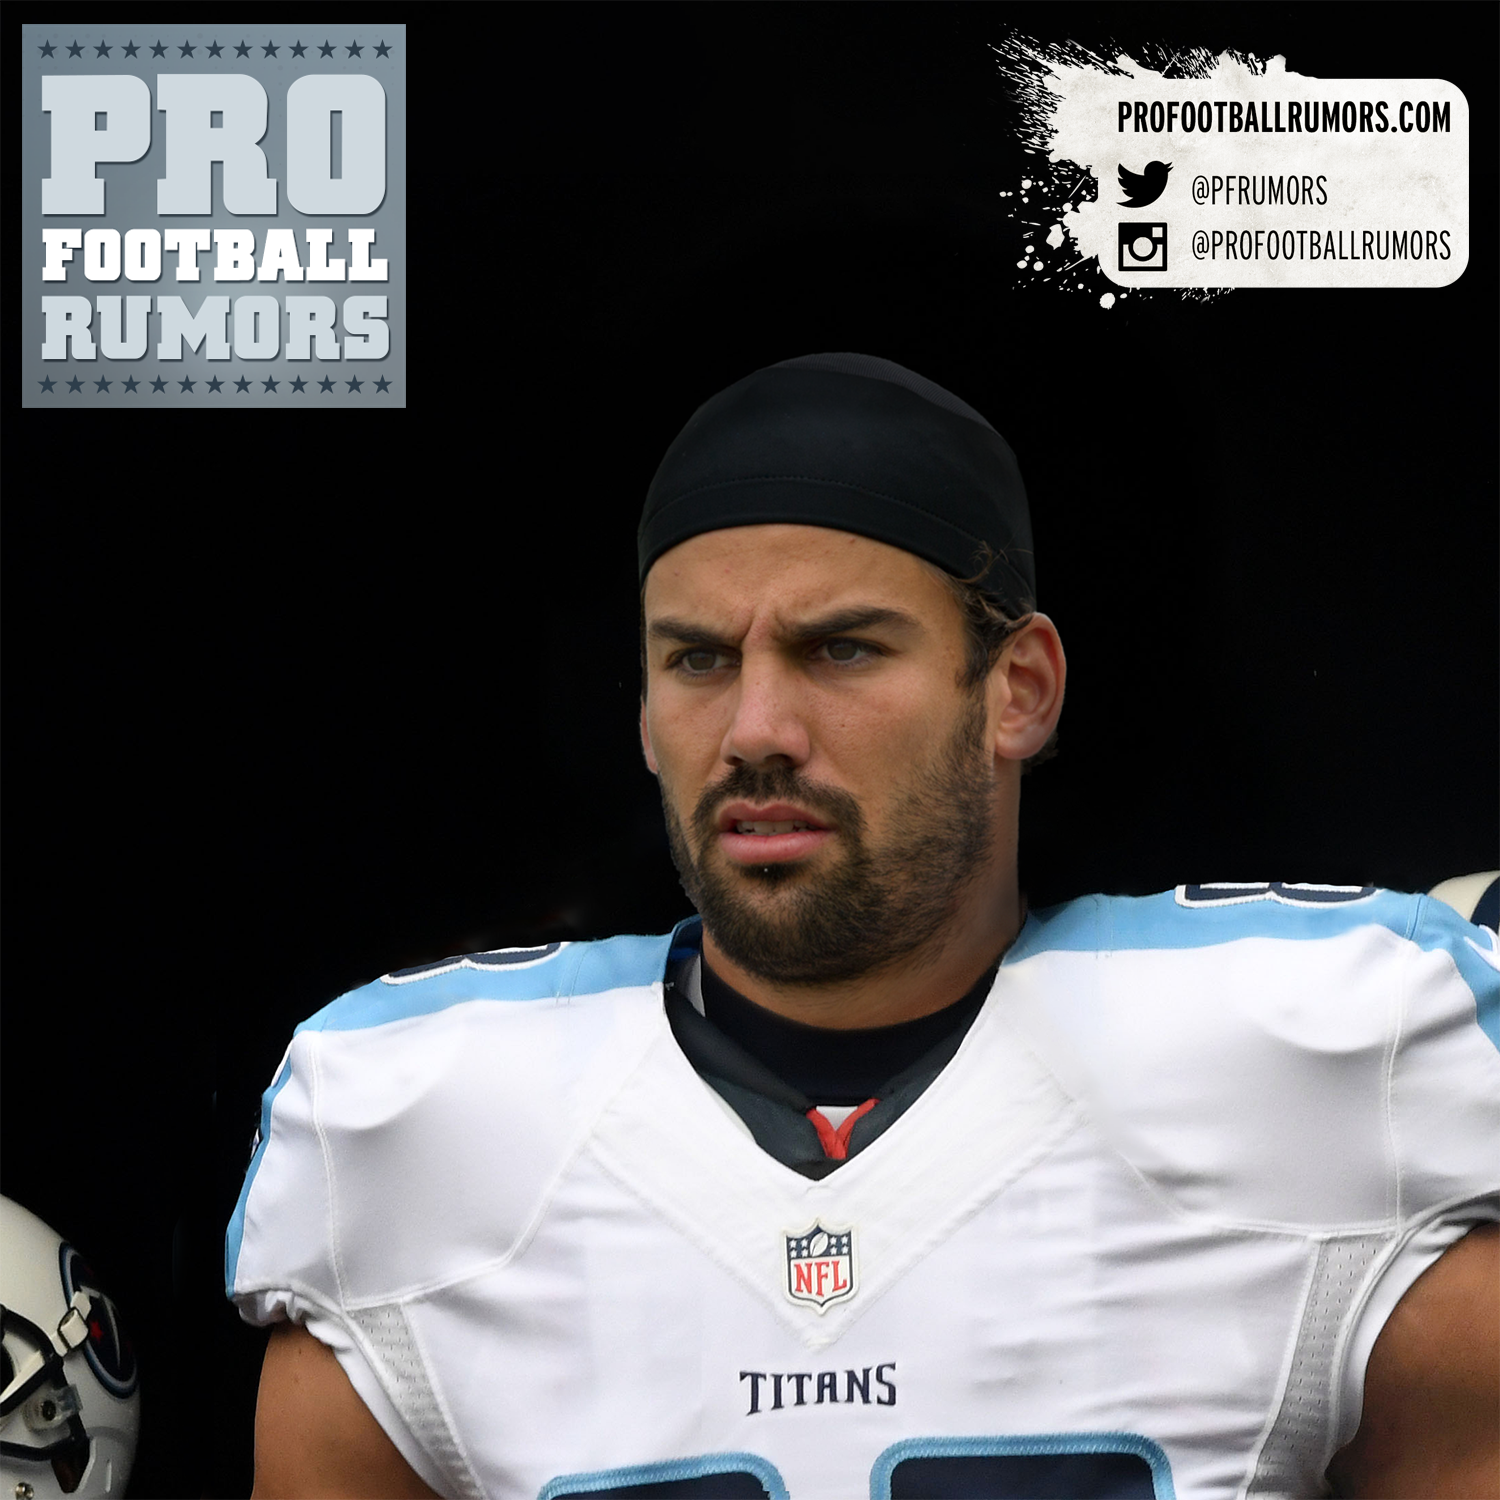 Details On Eric Decker's Titans Contract